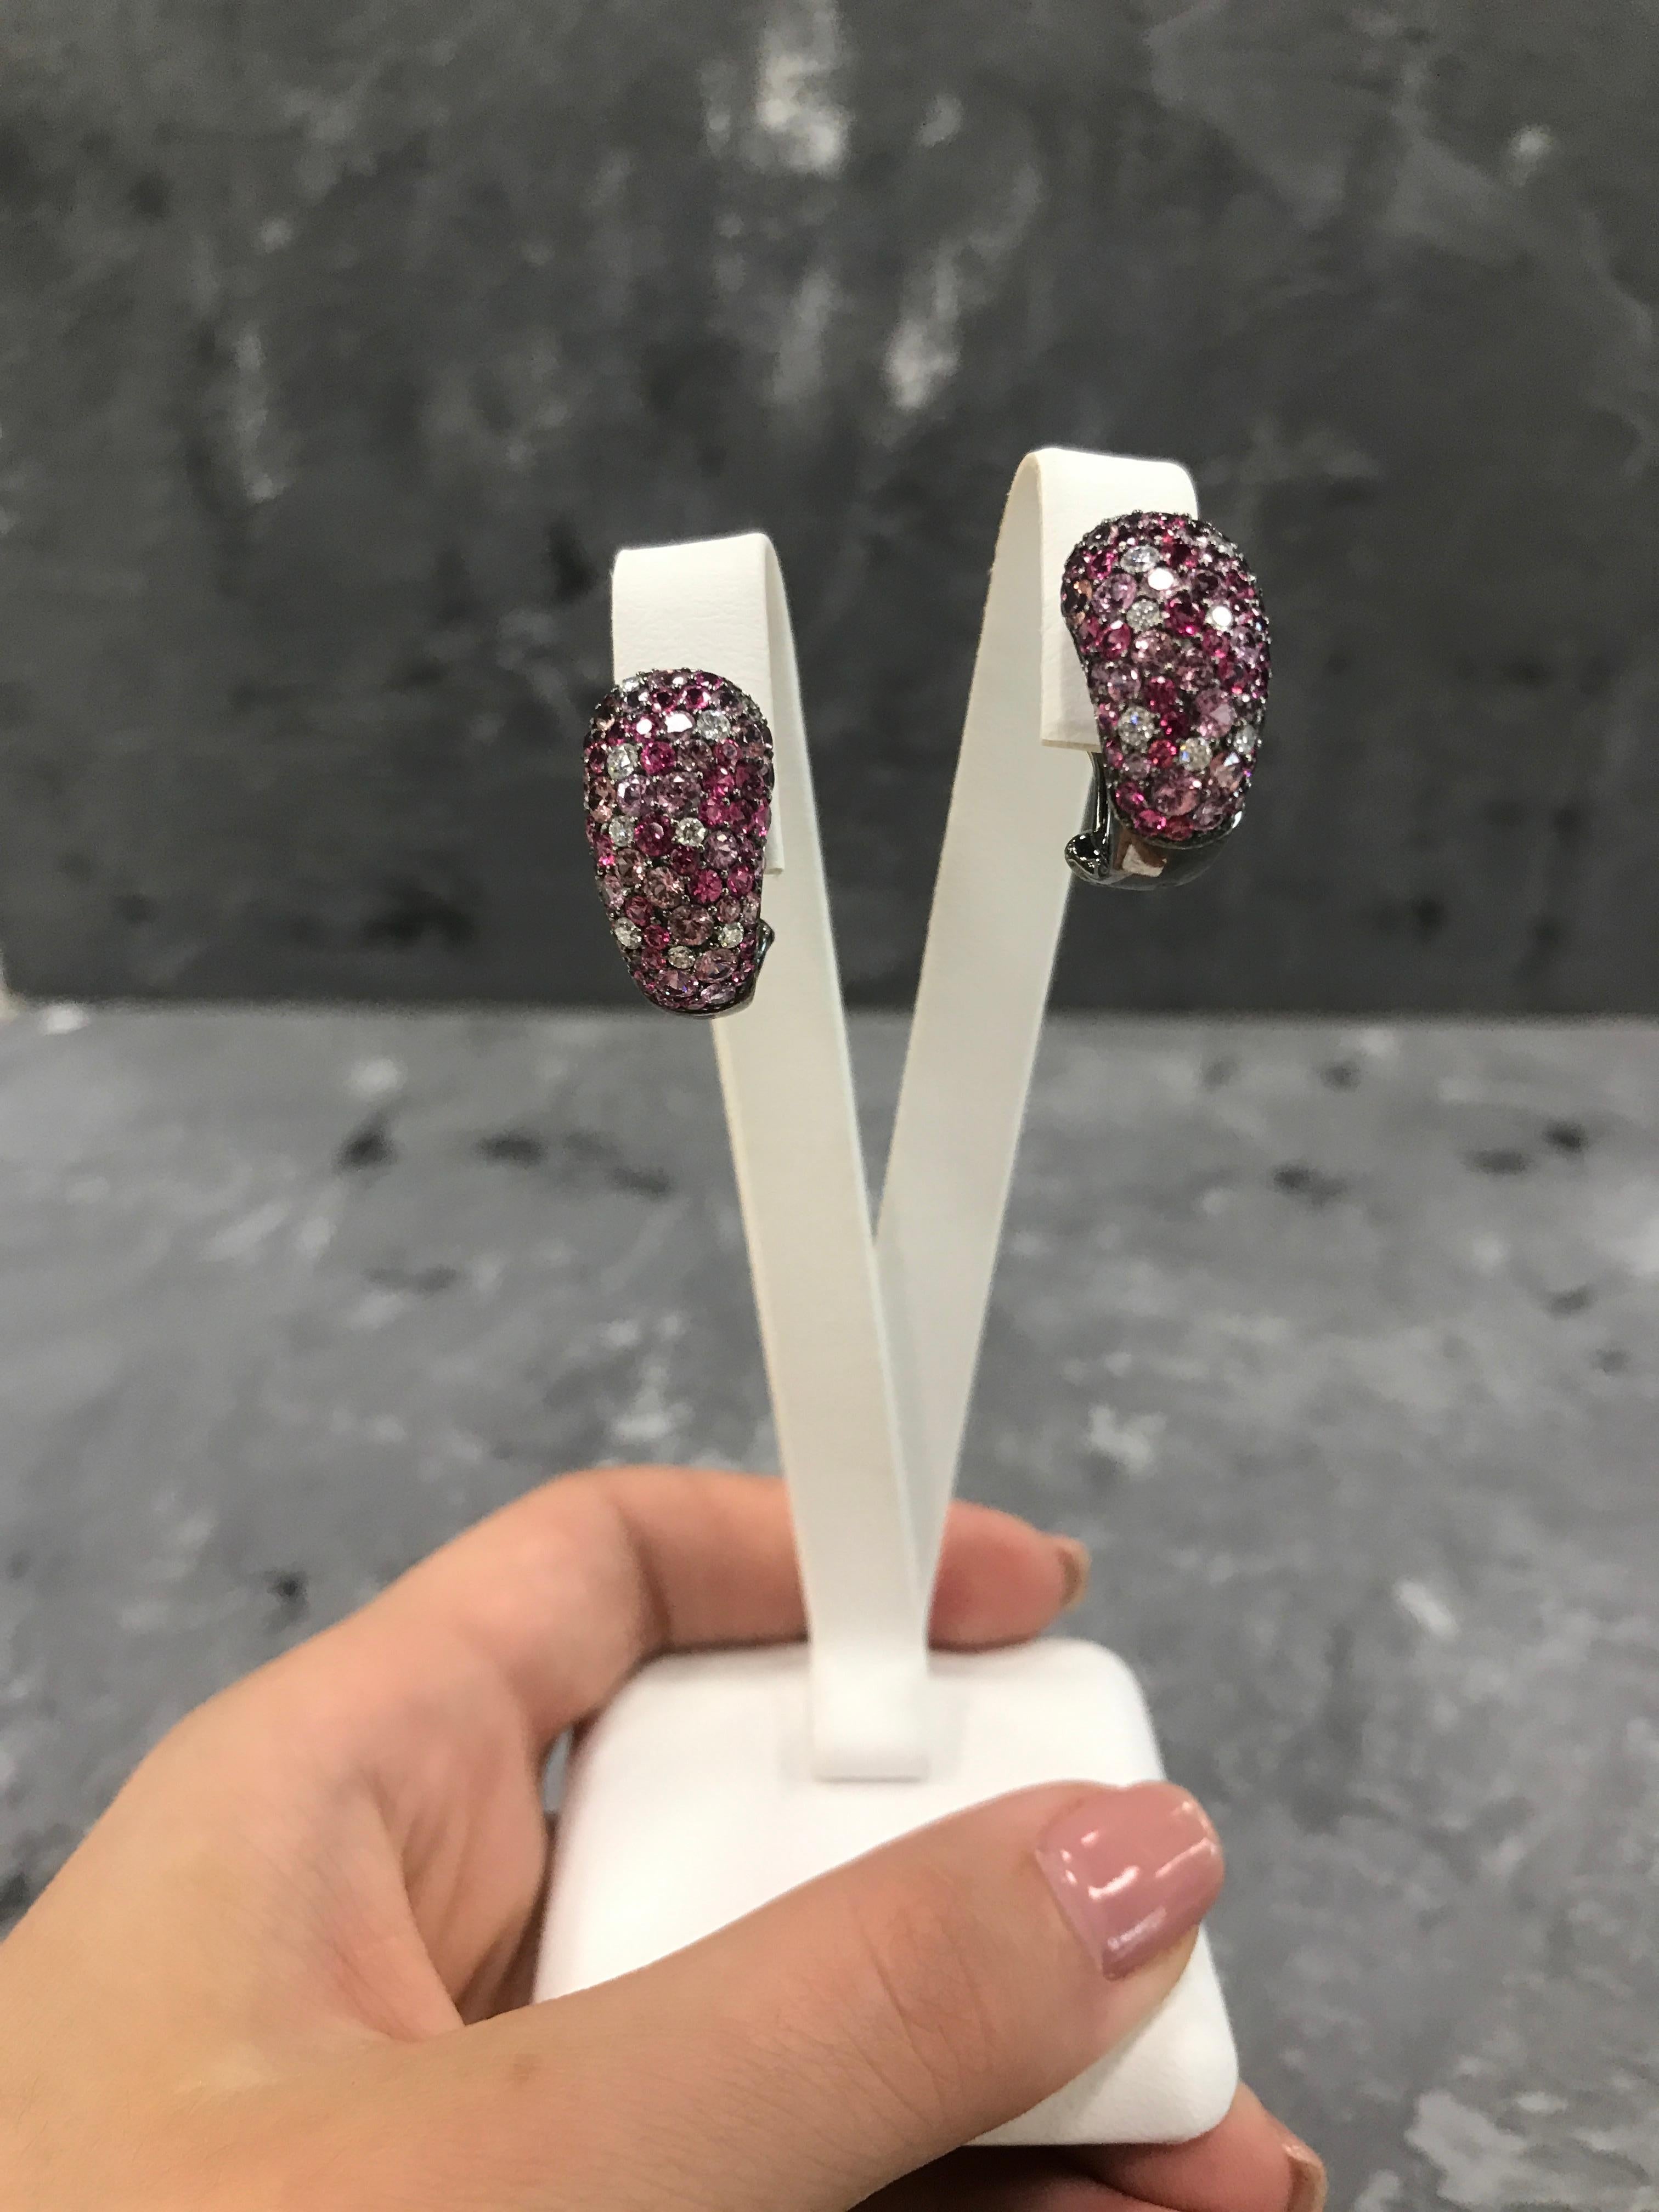 The gentle pink tones of these pink sapphires are inspired by the delicate flourishing nature and flowers decorating the Mediterranean panorama. So gentle, fresh and delicate.
These earrings are made to refresh the face and make you look like you